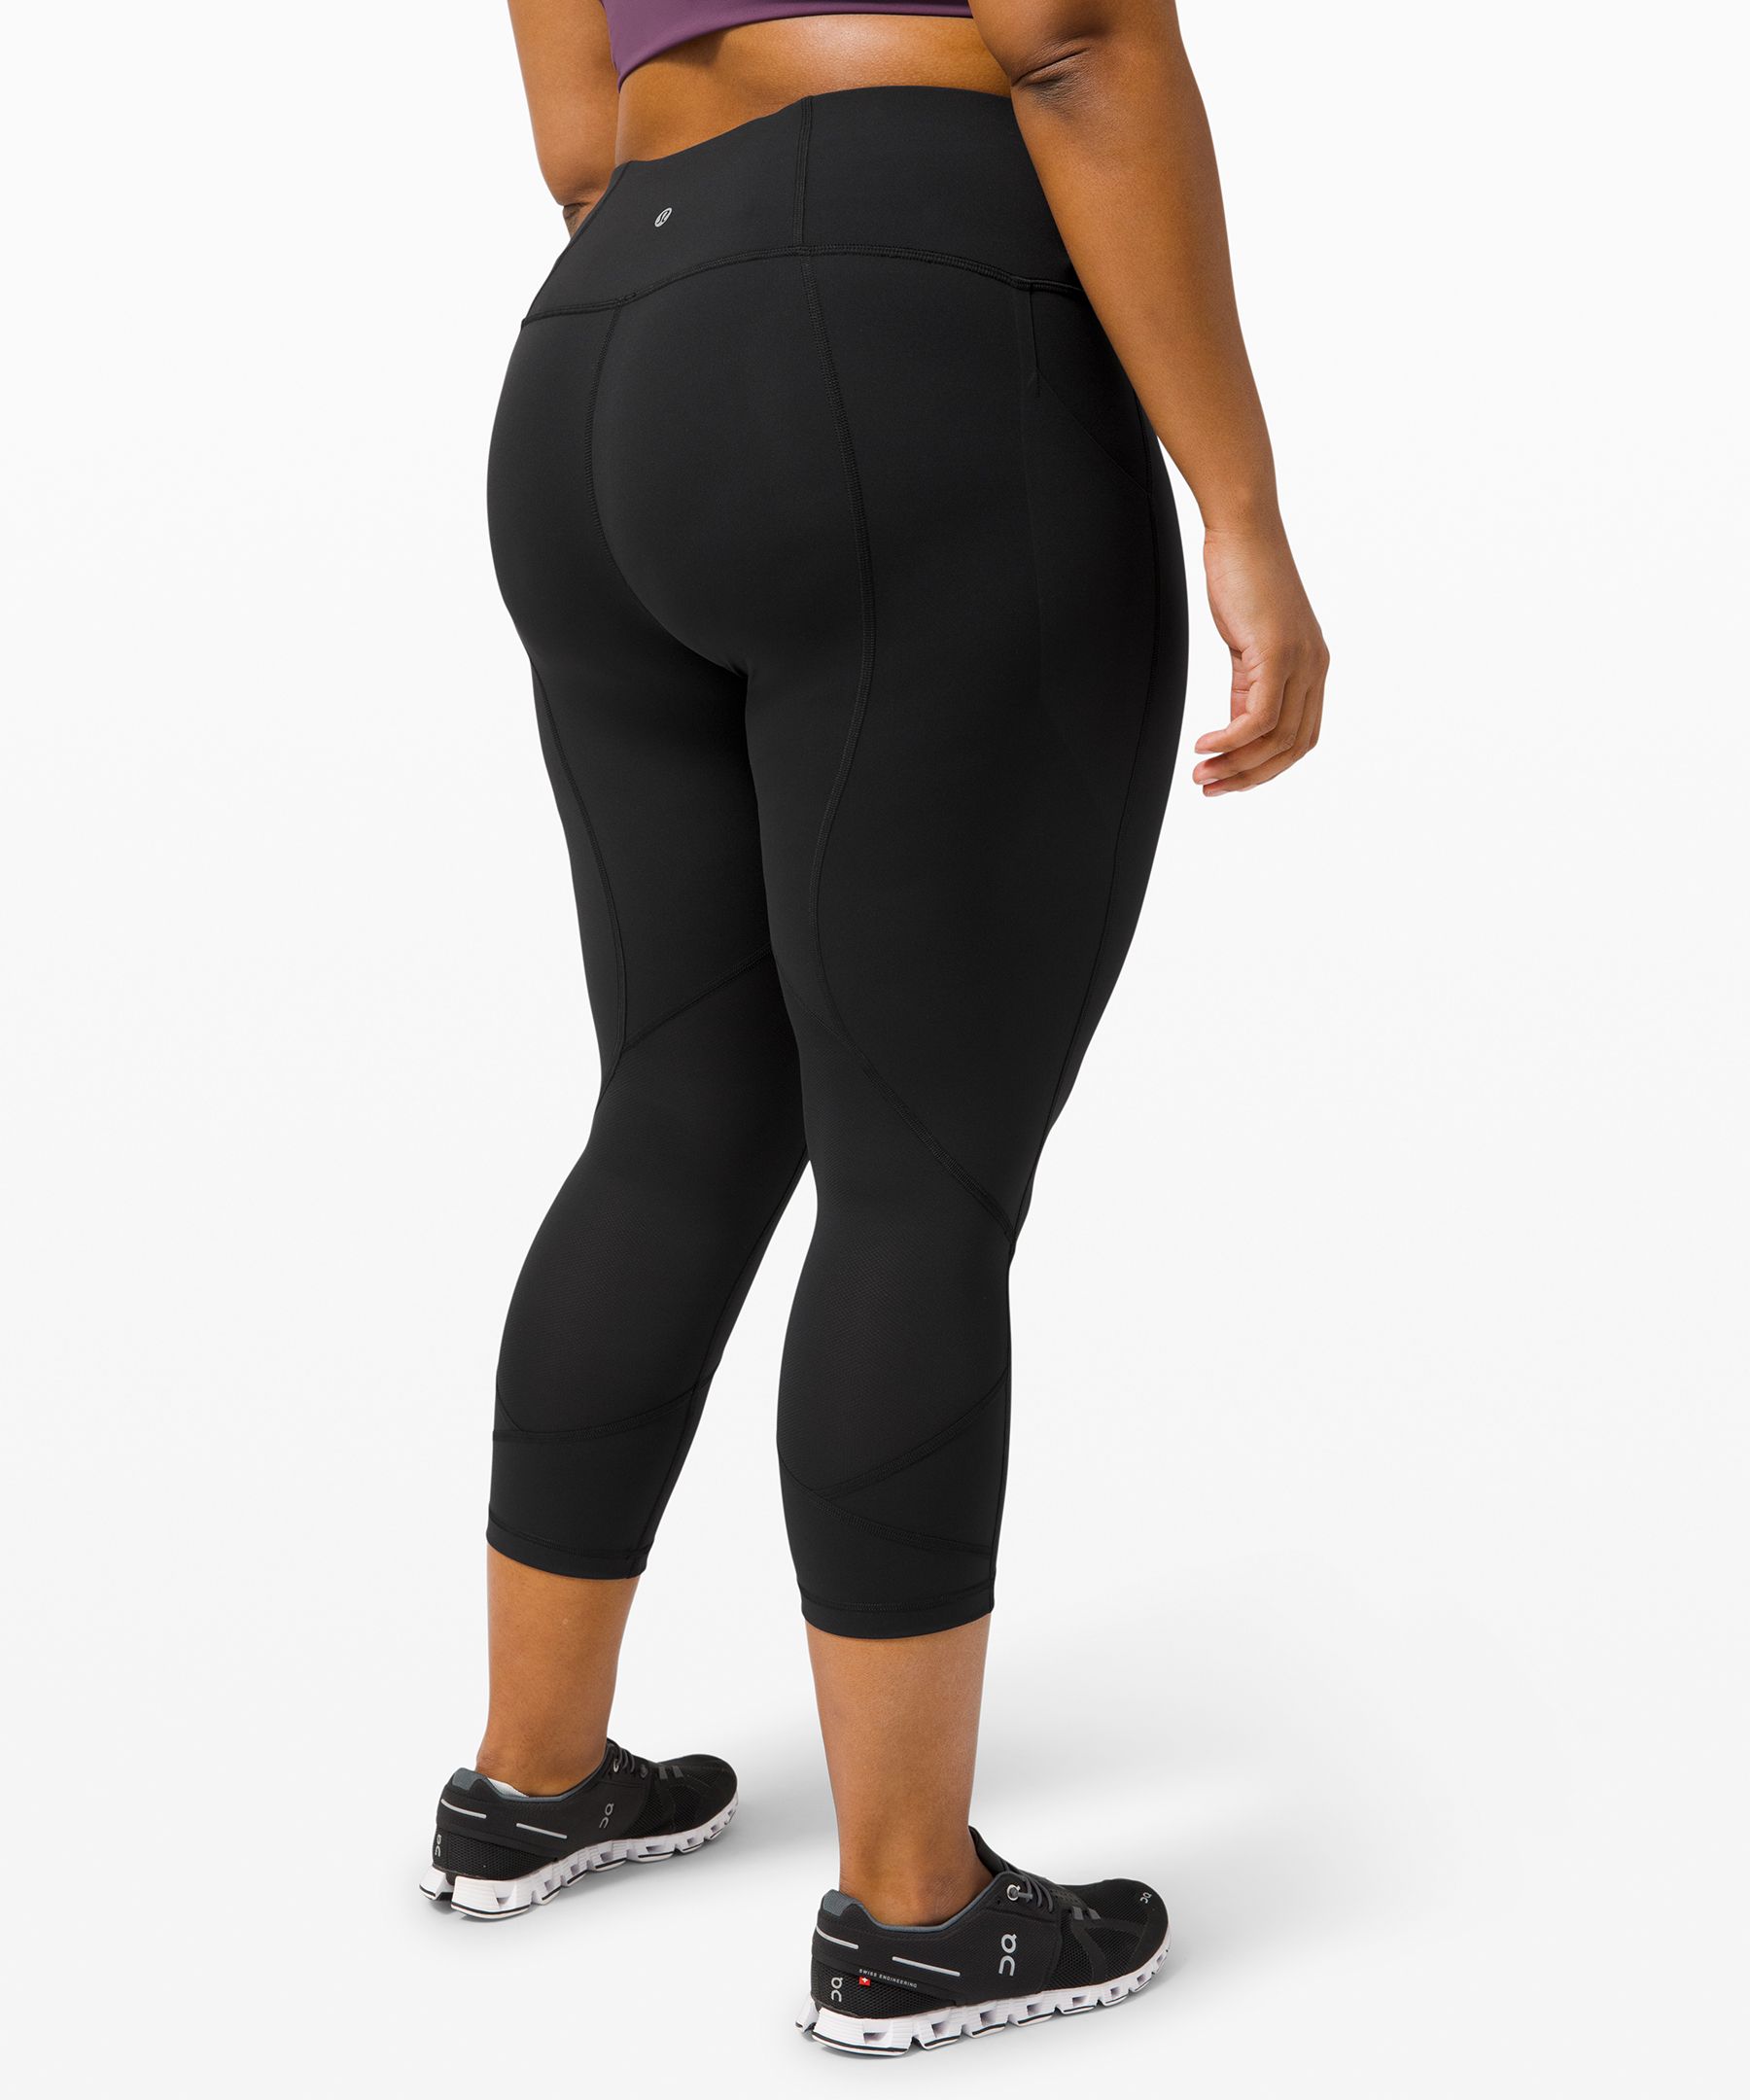 lululemon athletica Pace Rival Crop 22 - Athletic apparel